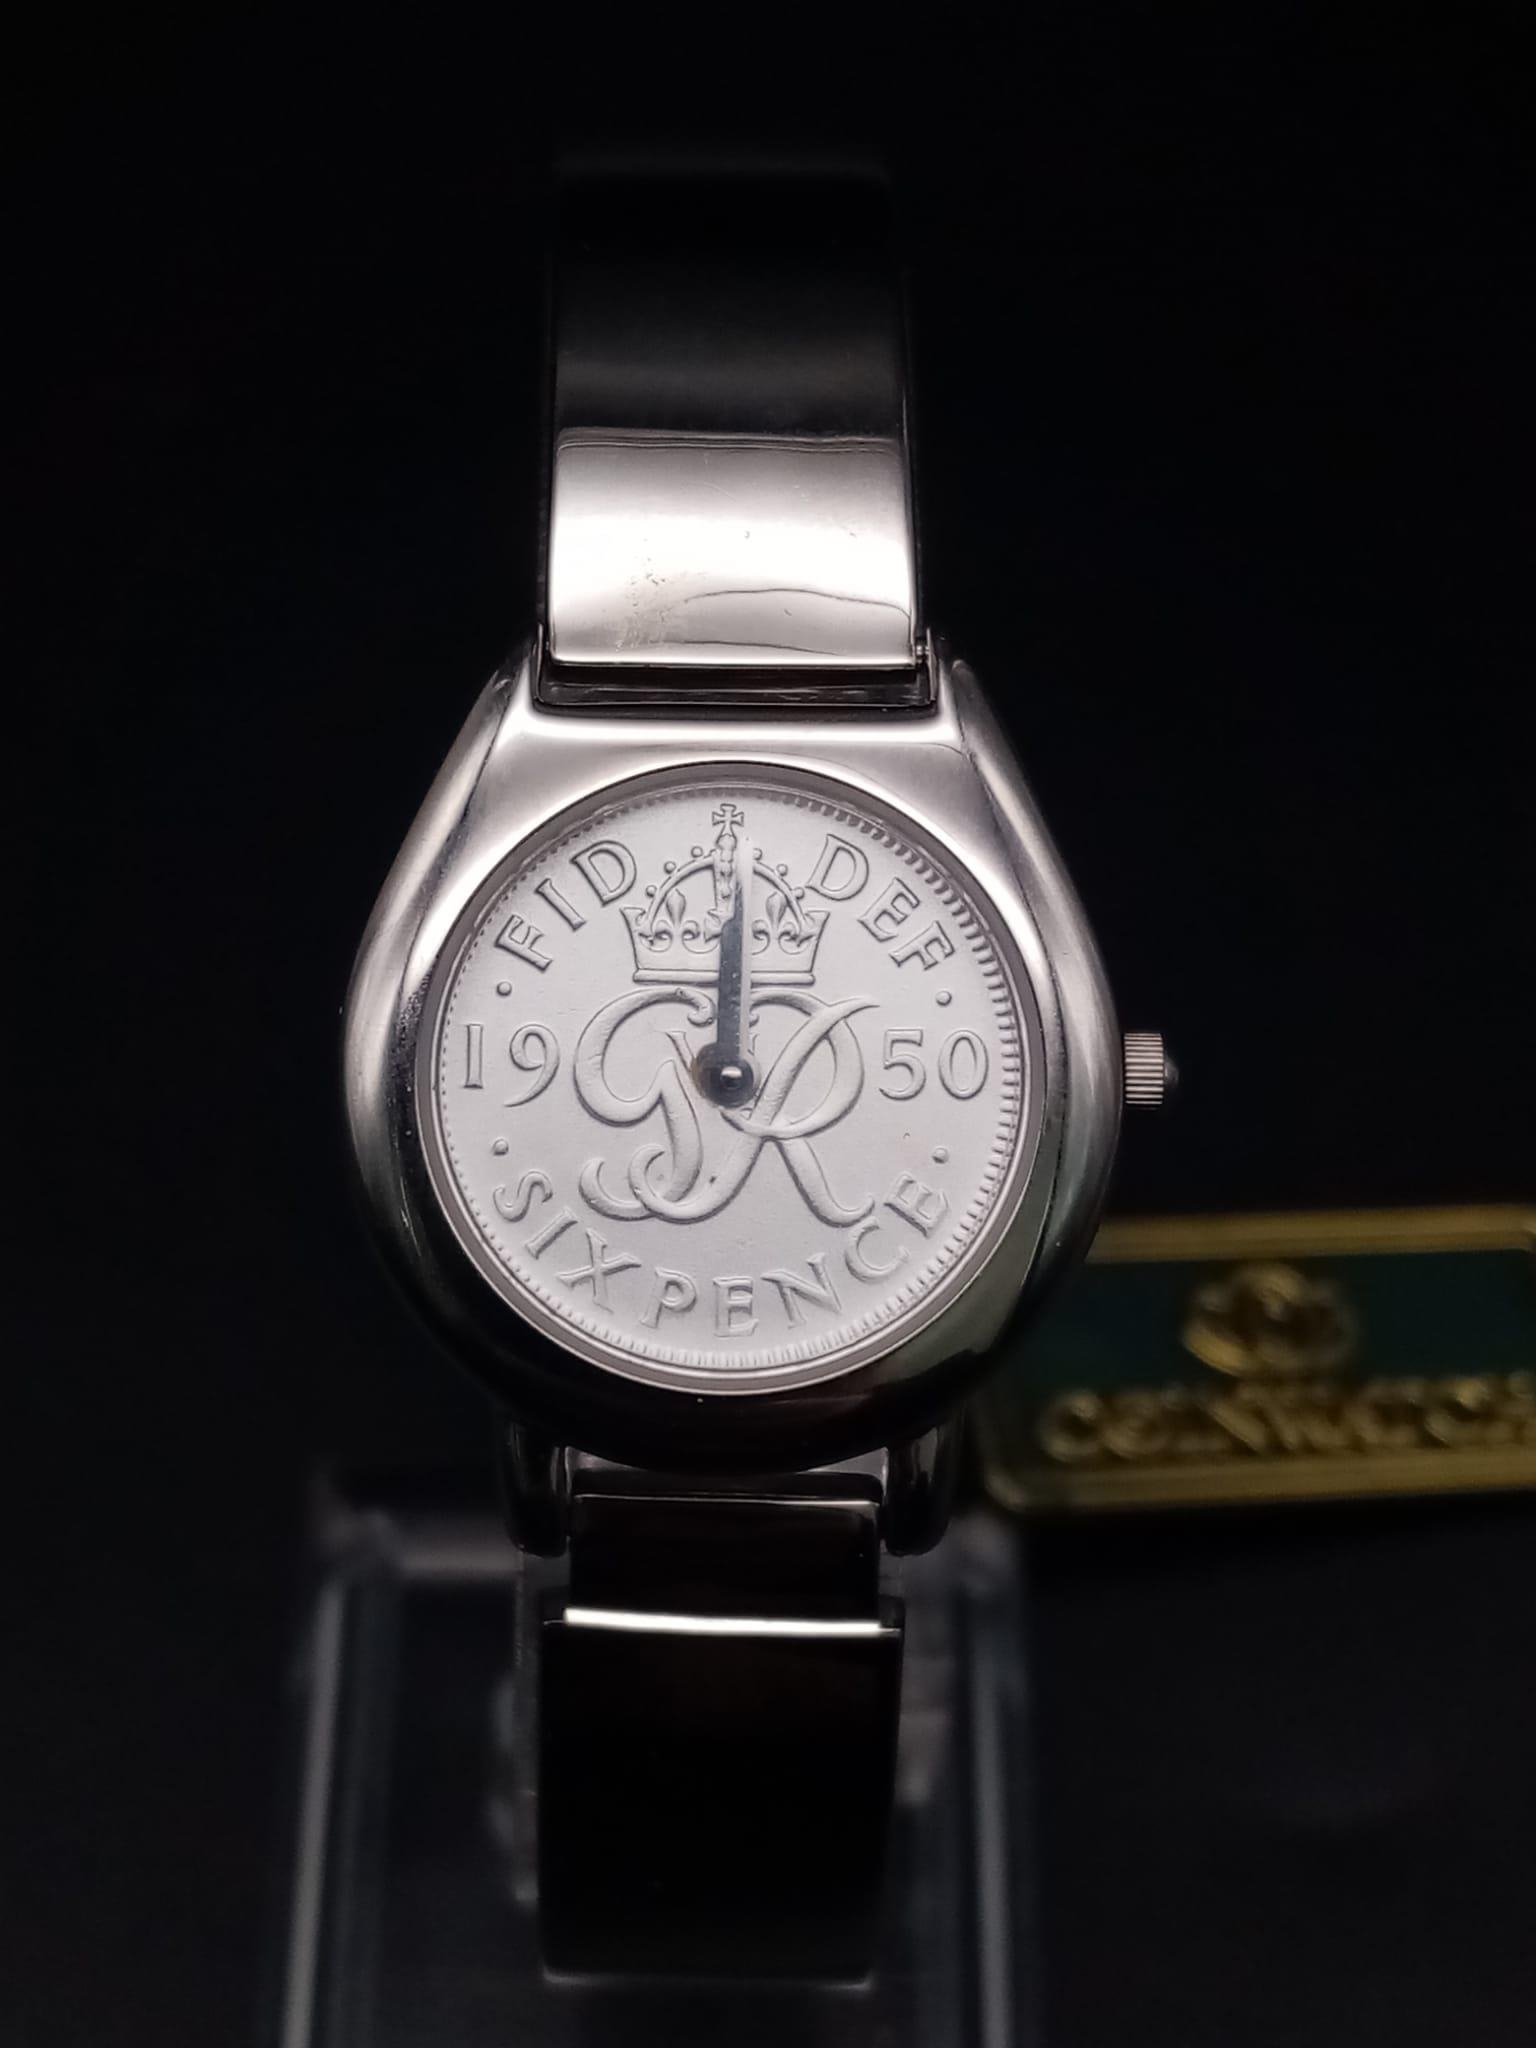 A ladies COIN WATCH in original presentation box. 25 mm case, stainless steel construction, in new/